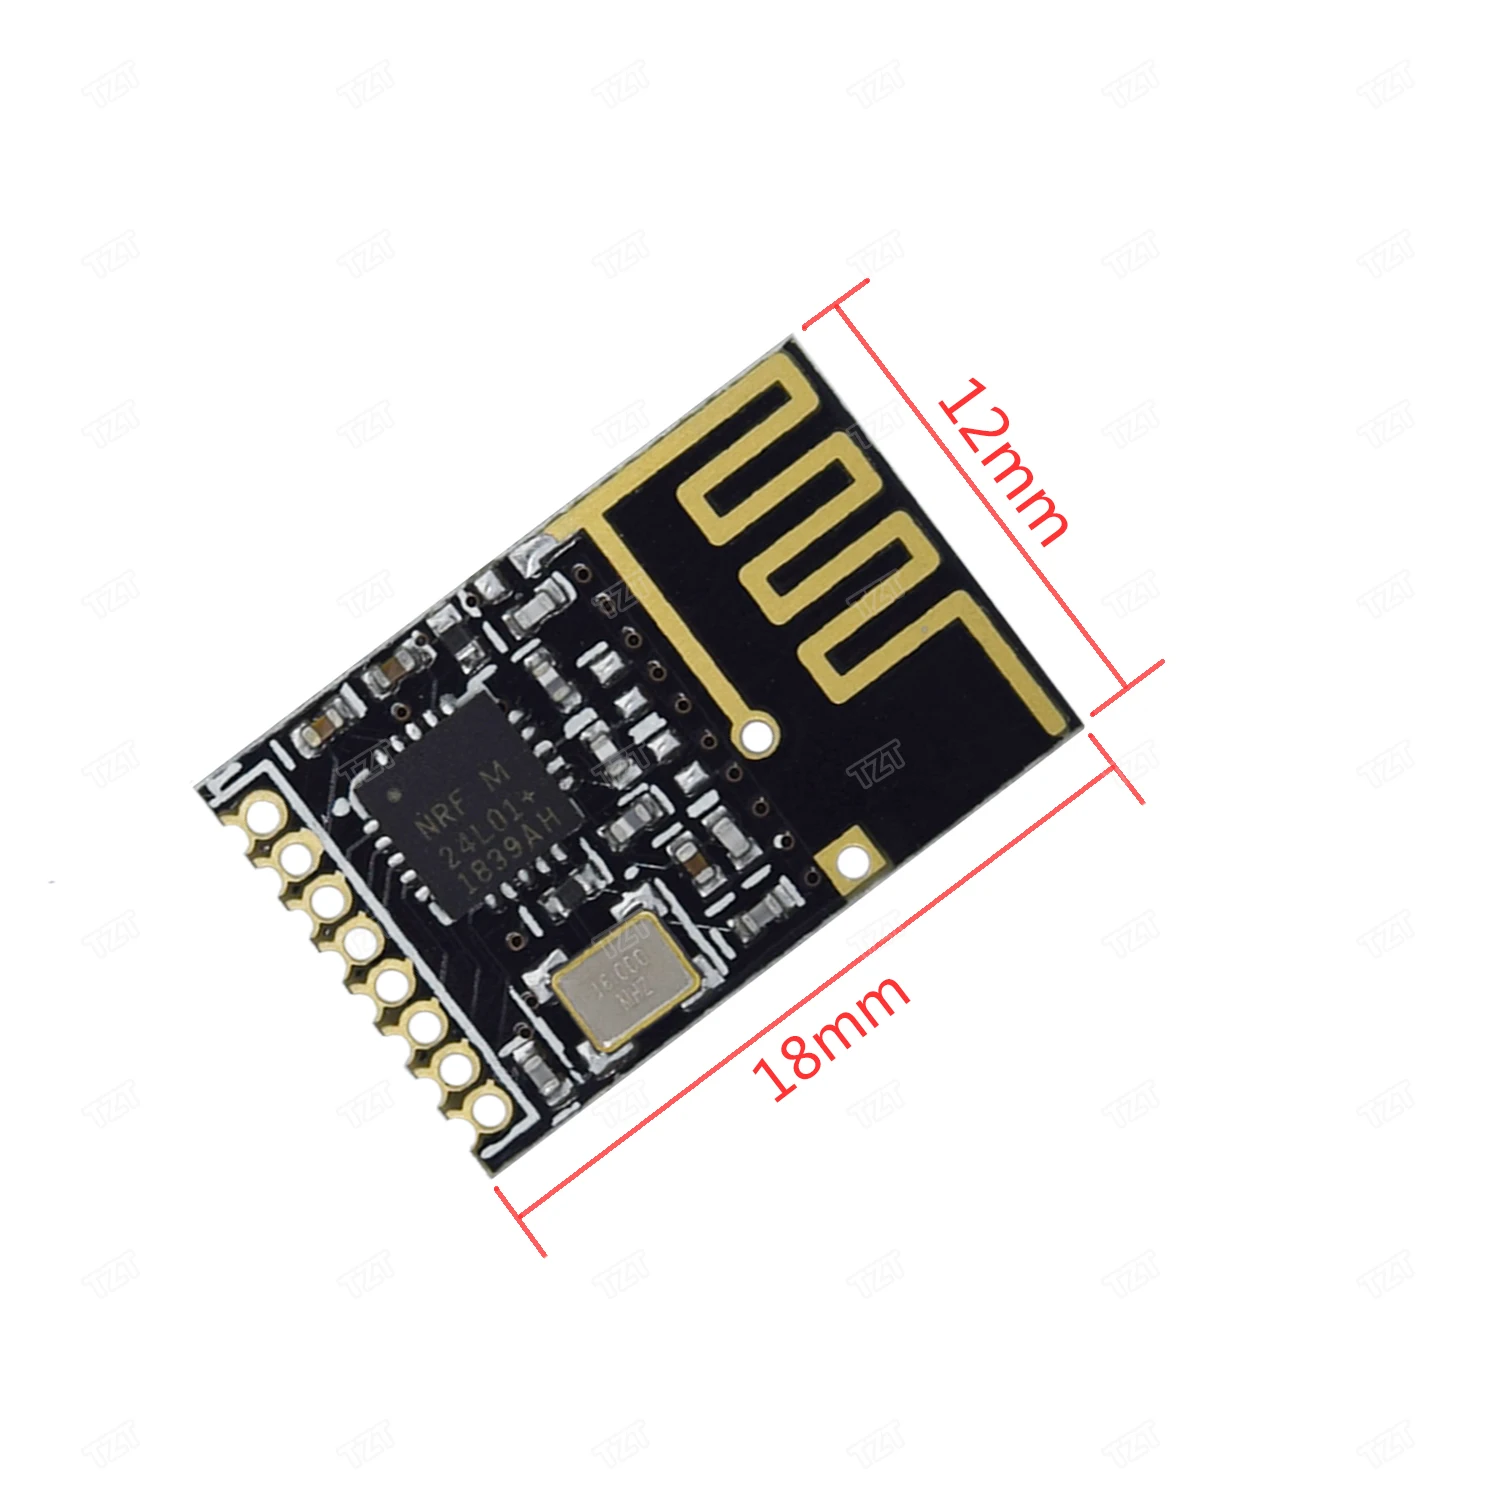 10Pcs 2.4GHZ NRF24L01+ANTENNA Wireless Transceiver Module For Microcontrol Ic ns